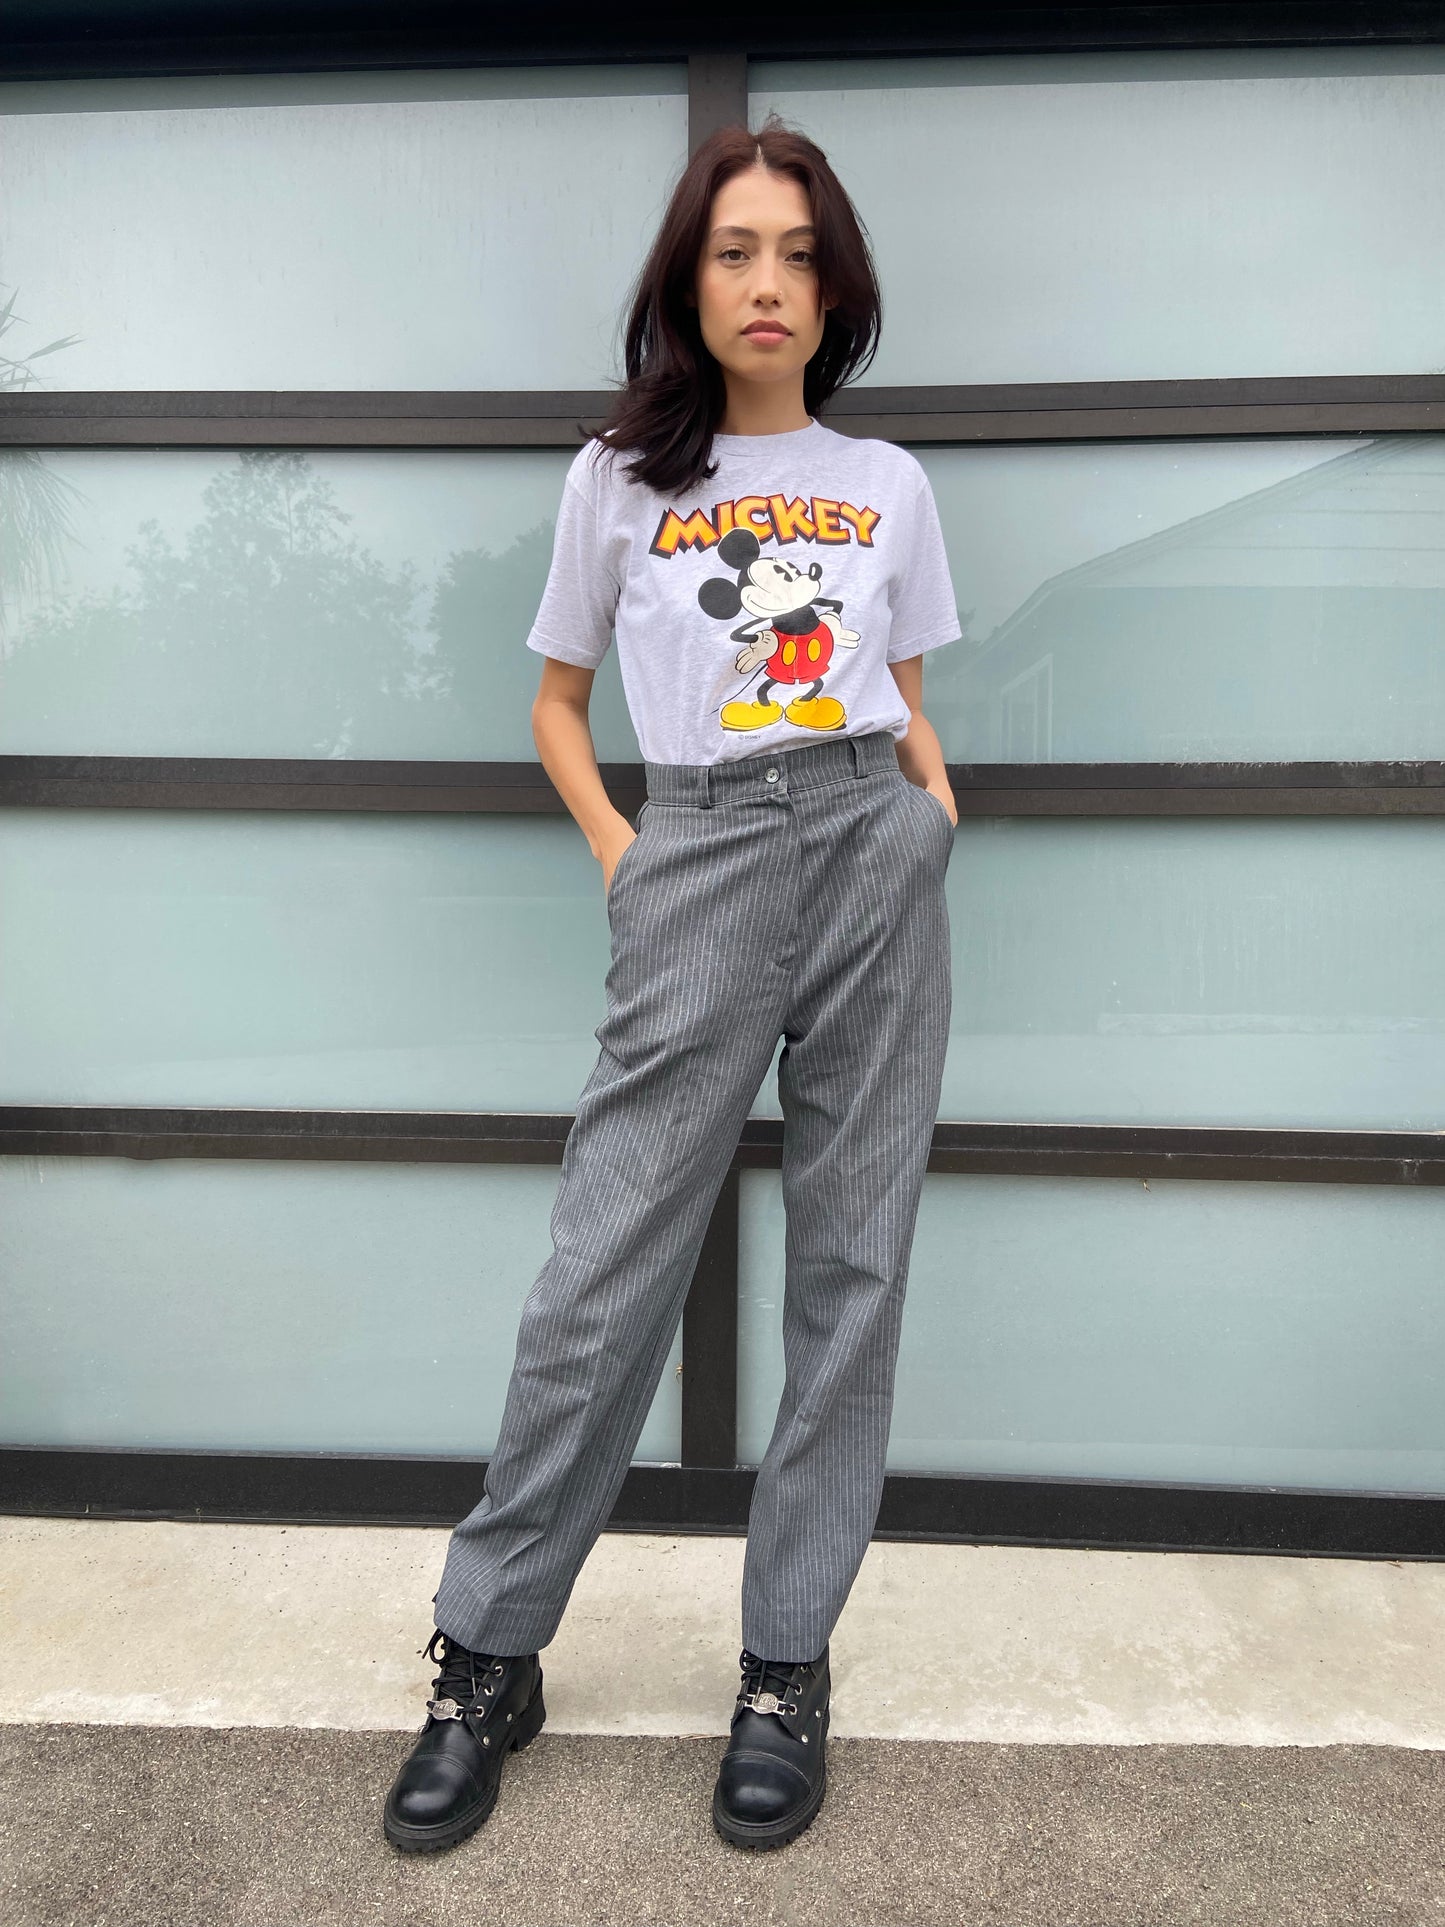 Mickey Mouse Tee